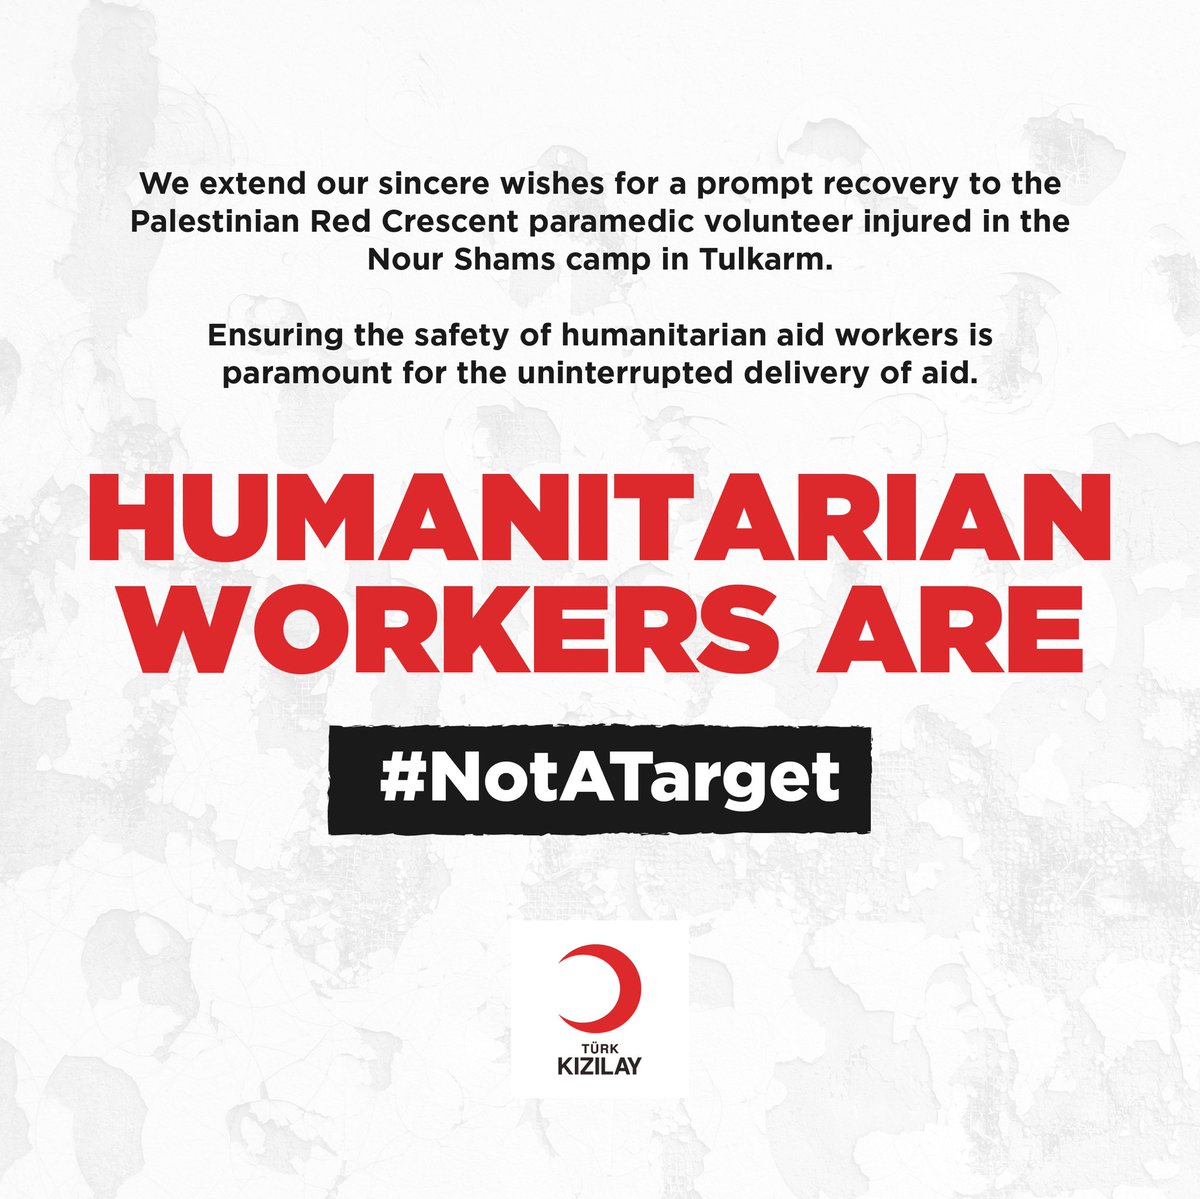 We extend our sincere wishes for a prompt recovery to the @PalestineRCS paramedic volunteer injured in the Nour Shams camp in Tulkarm. Ensuring the safety of humanitarian aid workers is paramount for the uninterrupted delivery of aid. Humanitarian workers are #NotATarget! ❌